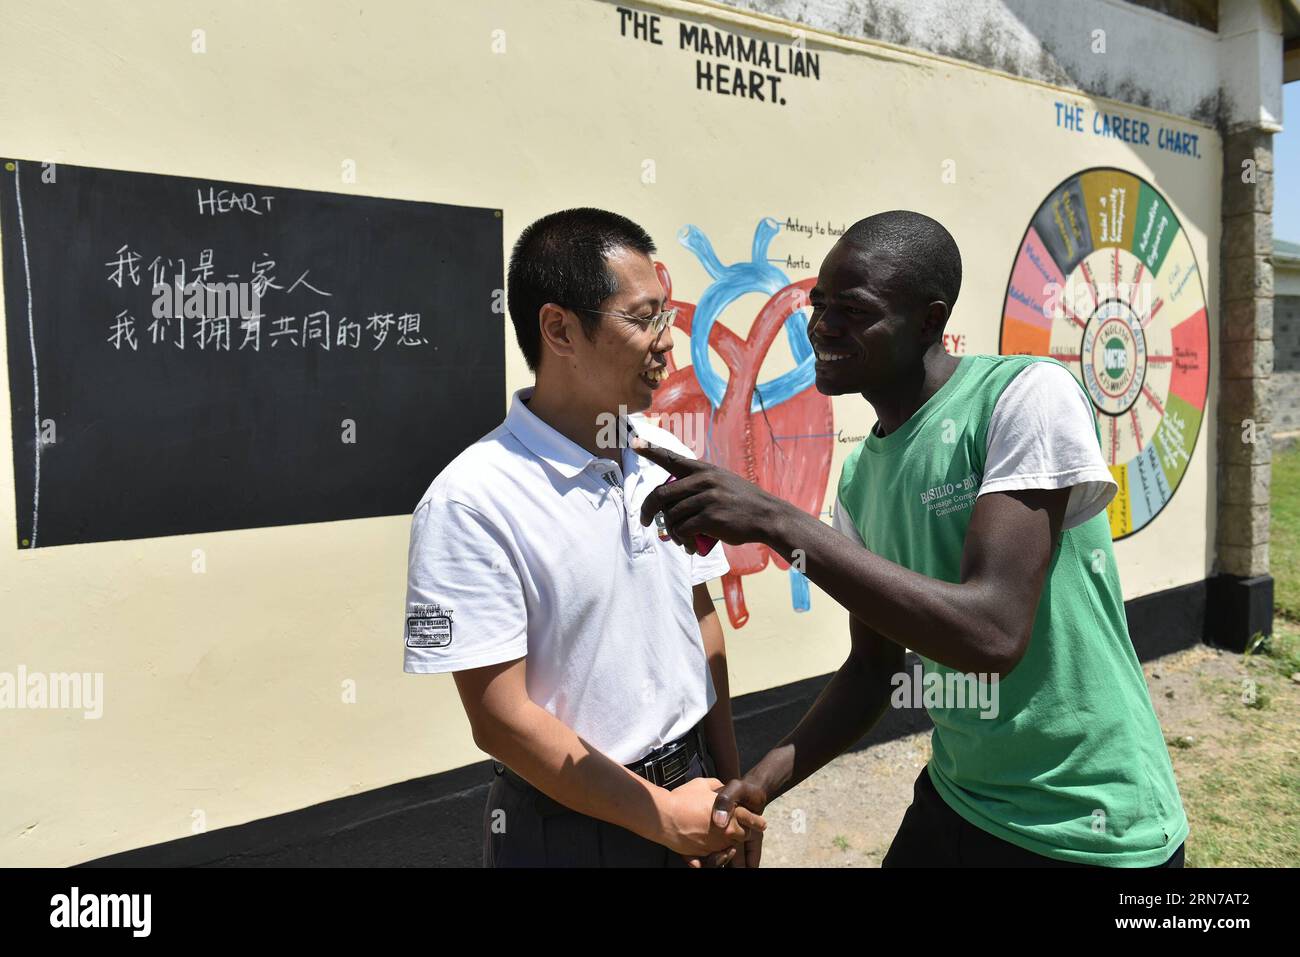 (150901)--KISUMU,  - Zhang Wenqiang (2nd L, front), a Chinese teacher who has been working in Kenya for 5 years, shakes hands with his Kenyan colleague Michael for farewell at Kibos Secondary School in Western Kenyan Kisumu County, on Aug. 27, 2015. Zhang came to Kenya in 2010 following an agreement between Kenya and Chinese governments to give Chinese language lessons in Kenyan schools, and has interacted with more than 10,000 students in Western Kenya. ) KENYA-KISUMU-CHINESE-TEACHER SunxRuibo PUBLICATIONxNOTxINxCHN   150901 Kisumu Zhang Wenqiang 2nd l Front a Chinese Teacher Who has been Wor Stock Photo